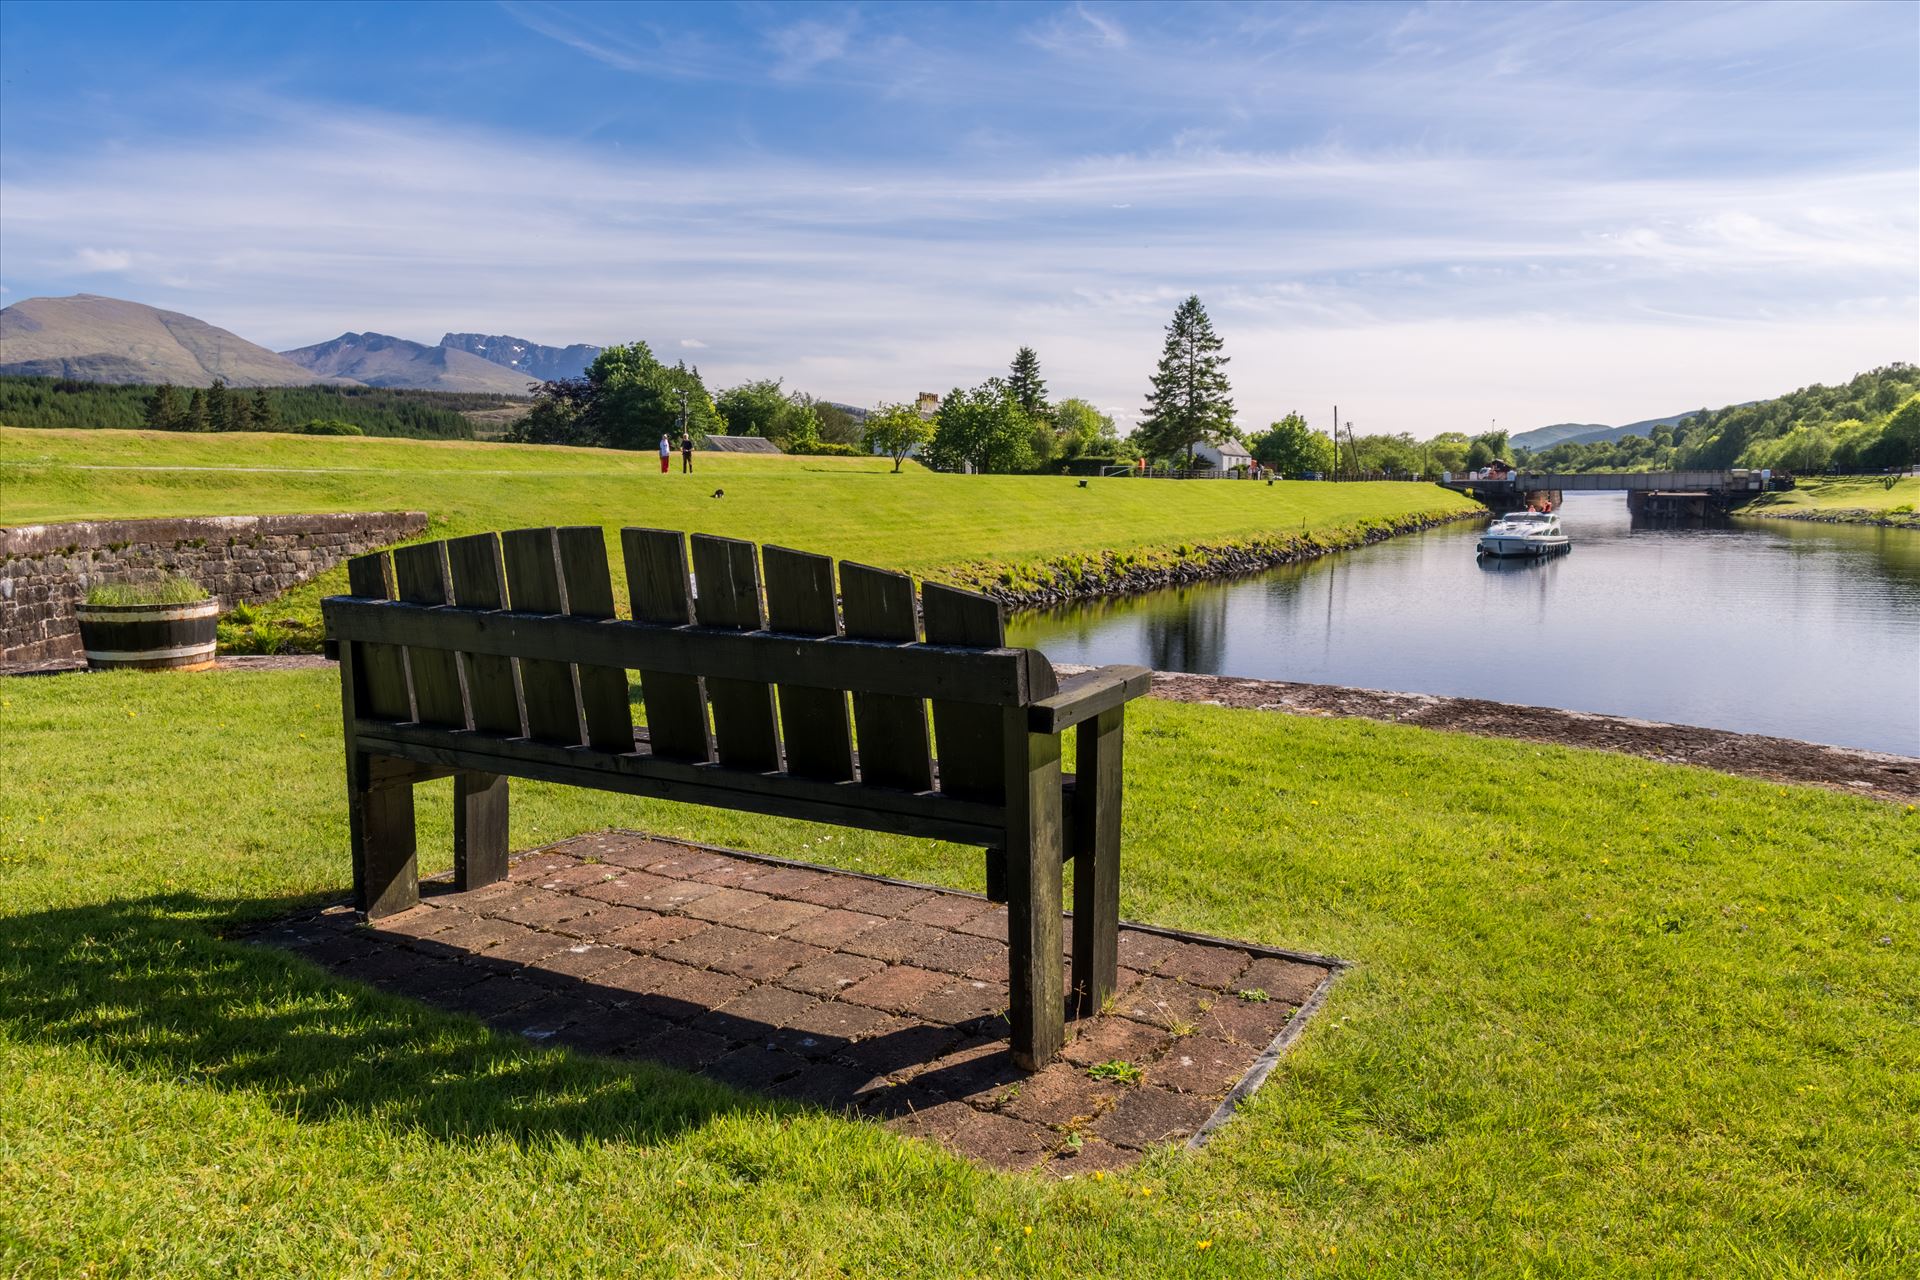 A seat with a view - Overlooking the Caladonian canal at Kytra Locks, the seat provides stunning views towards Ben Nevis by philreay